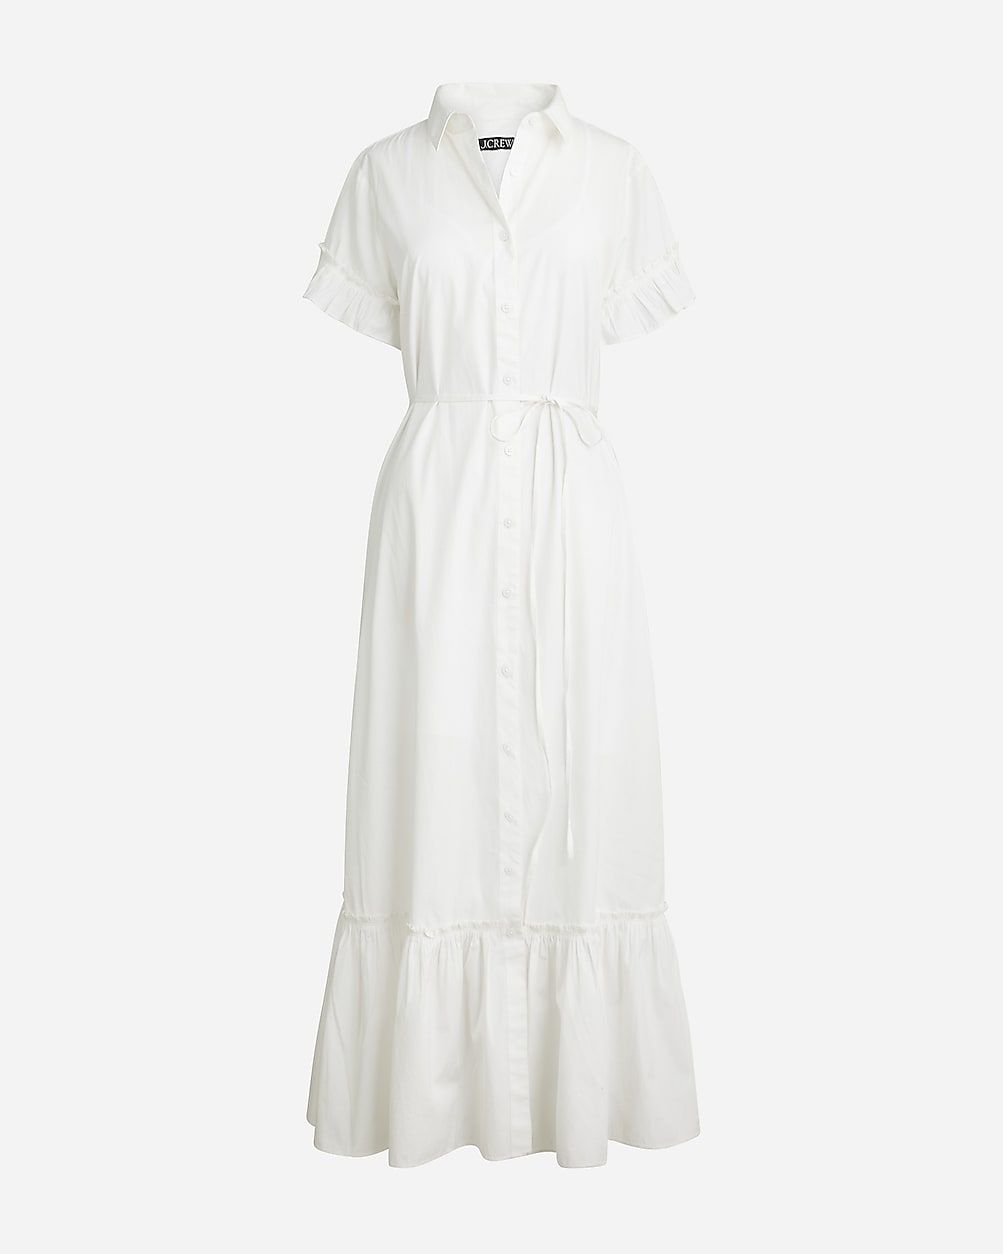 new5.0(3 REVIEWS)Amelia maxi shirtdress in cotton poplin$168.0030% off full price with code SHOP3... | J.Crew US